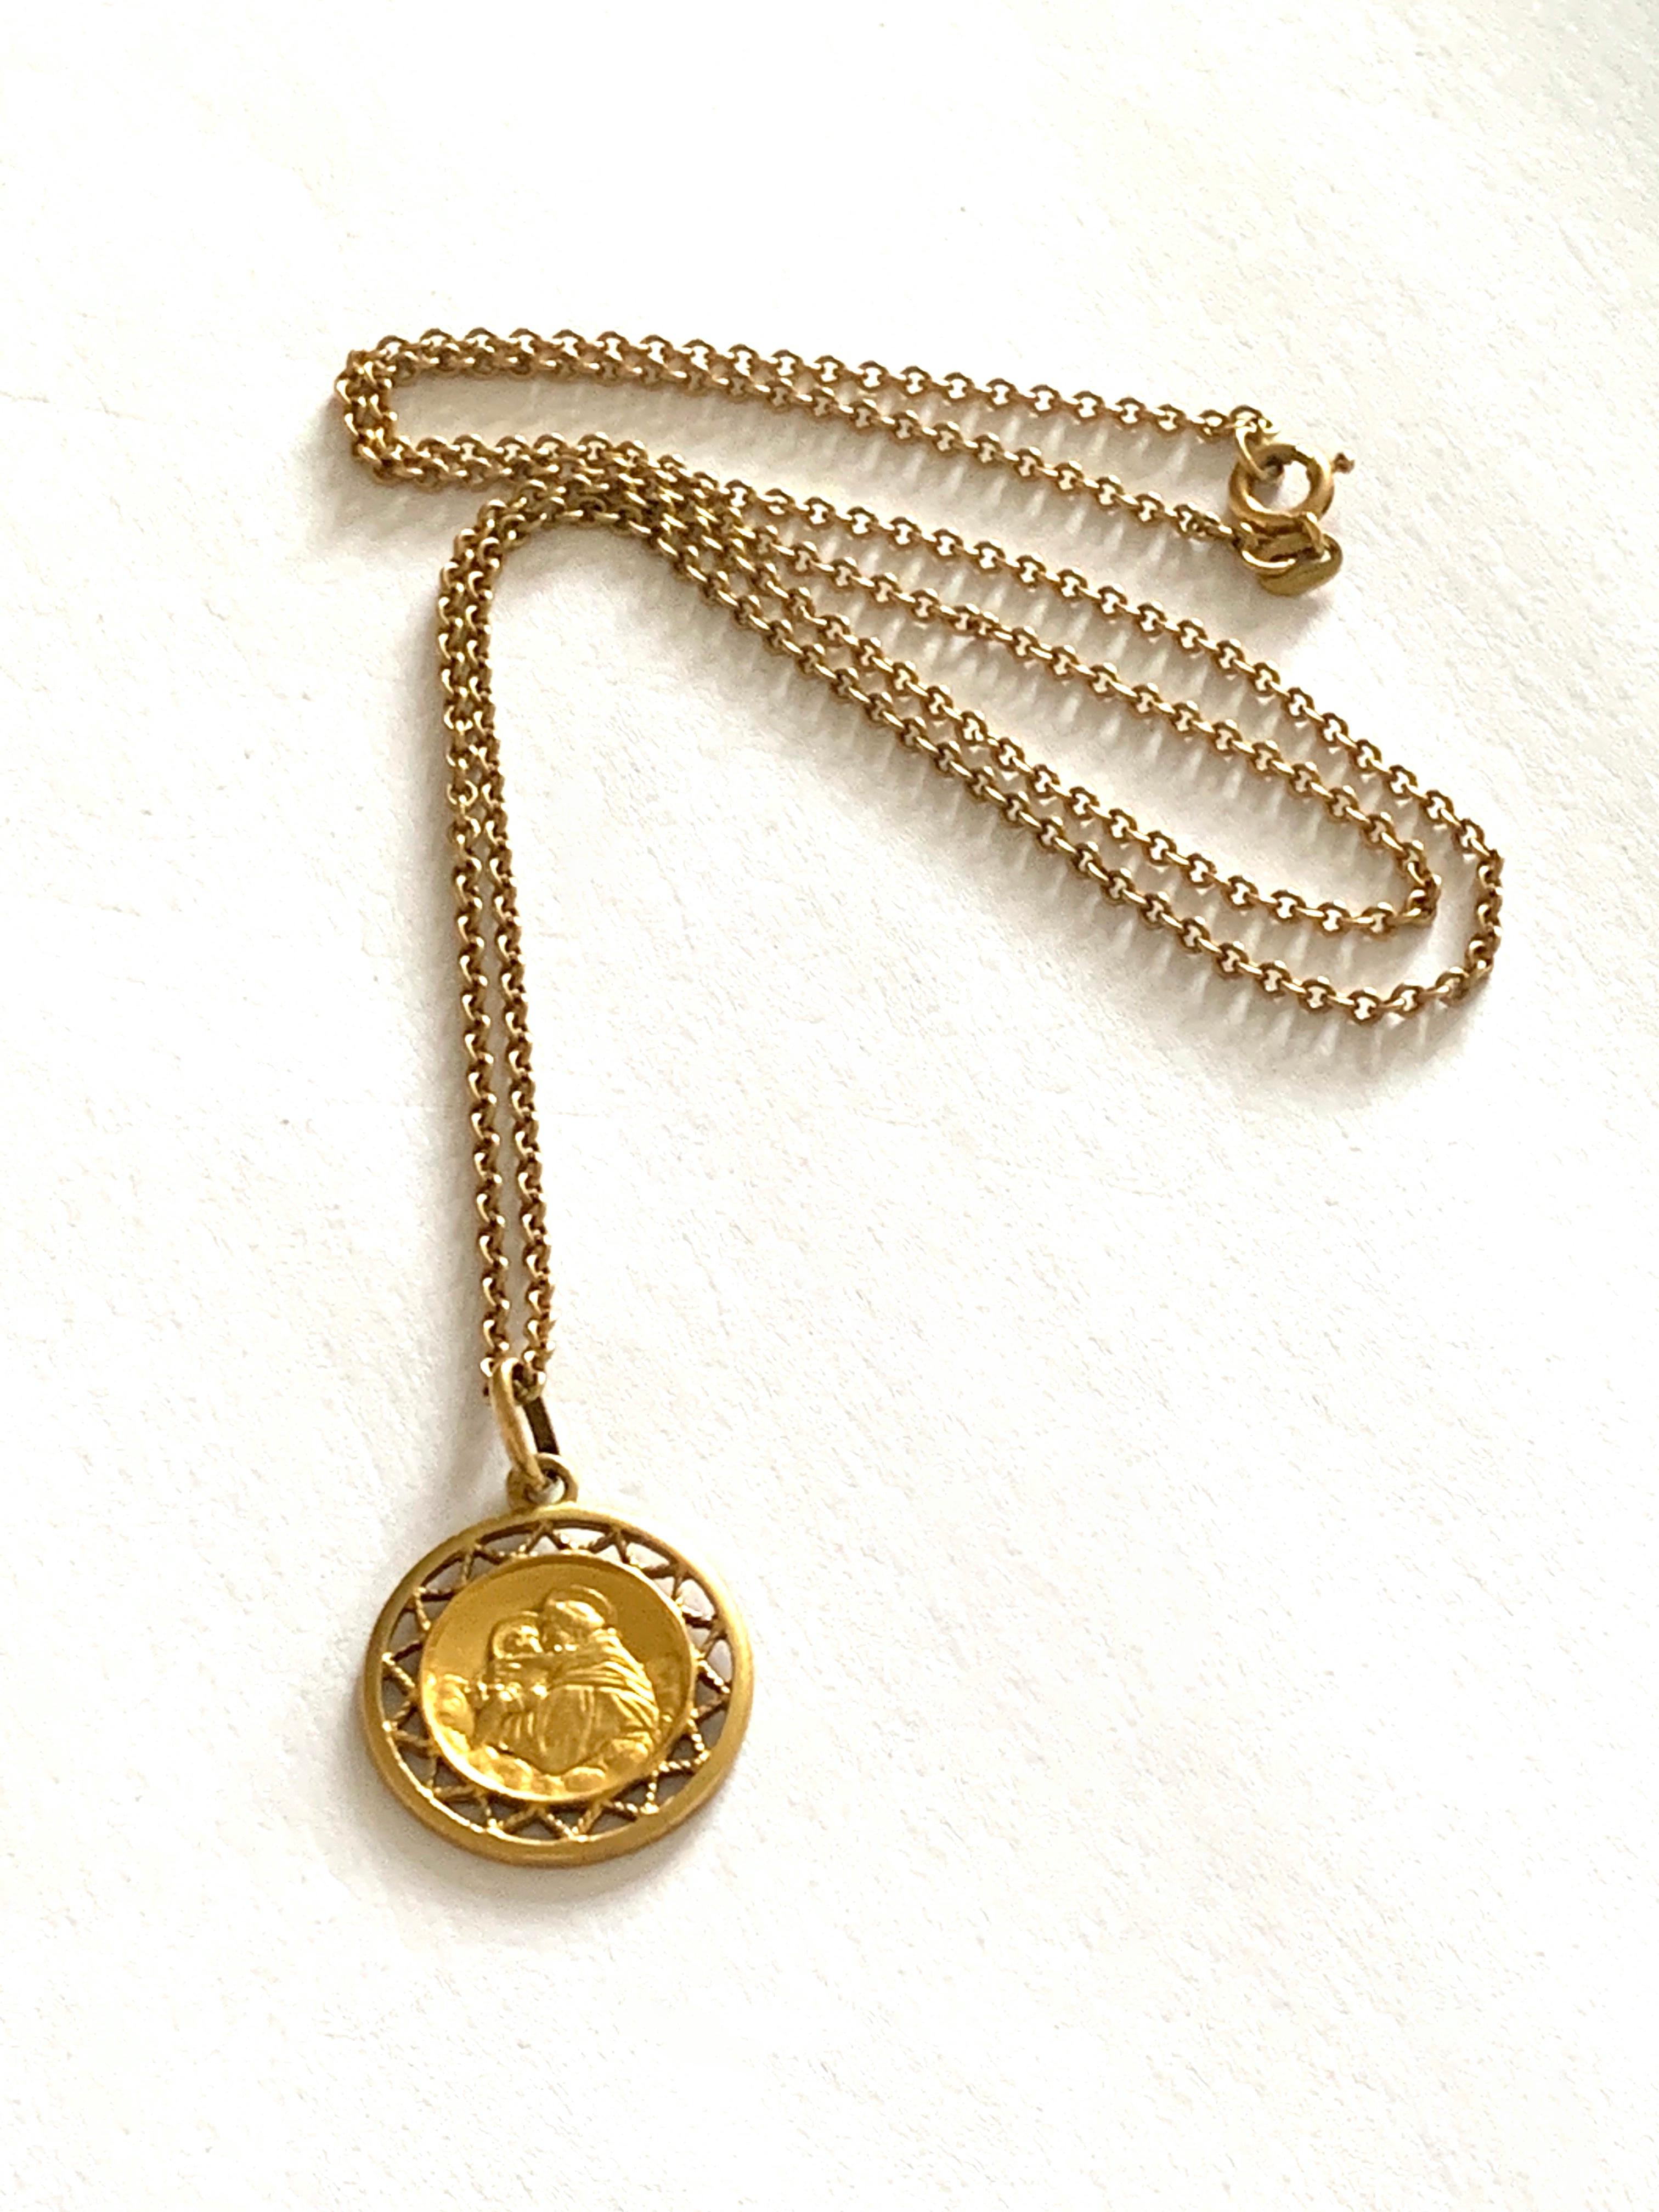 Beautiful
18ct Gold Religious St.Christopher
on a matching 18ct Gold Chain
Circa Pre 1950

Italian hallmark stamp on reverse of pendant
and on Chain Stamped 750 AUR - which is solid 18ct Gold

as necklace is pre 1950 it is not required to have a U.K